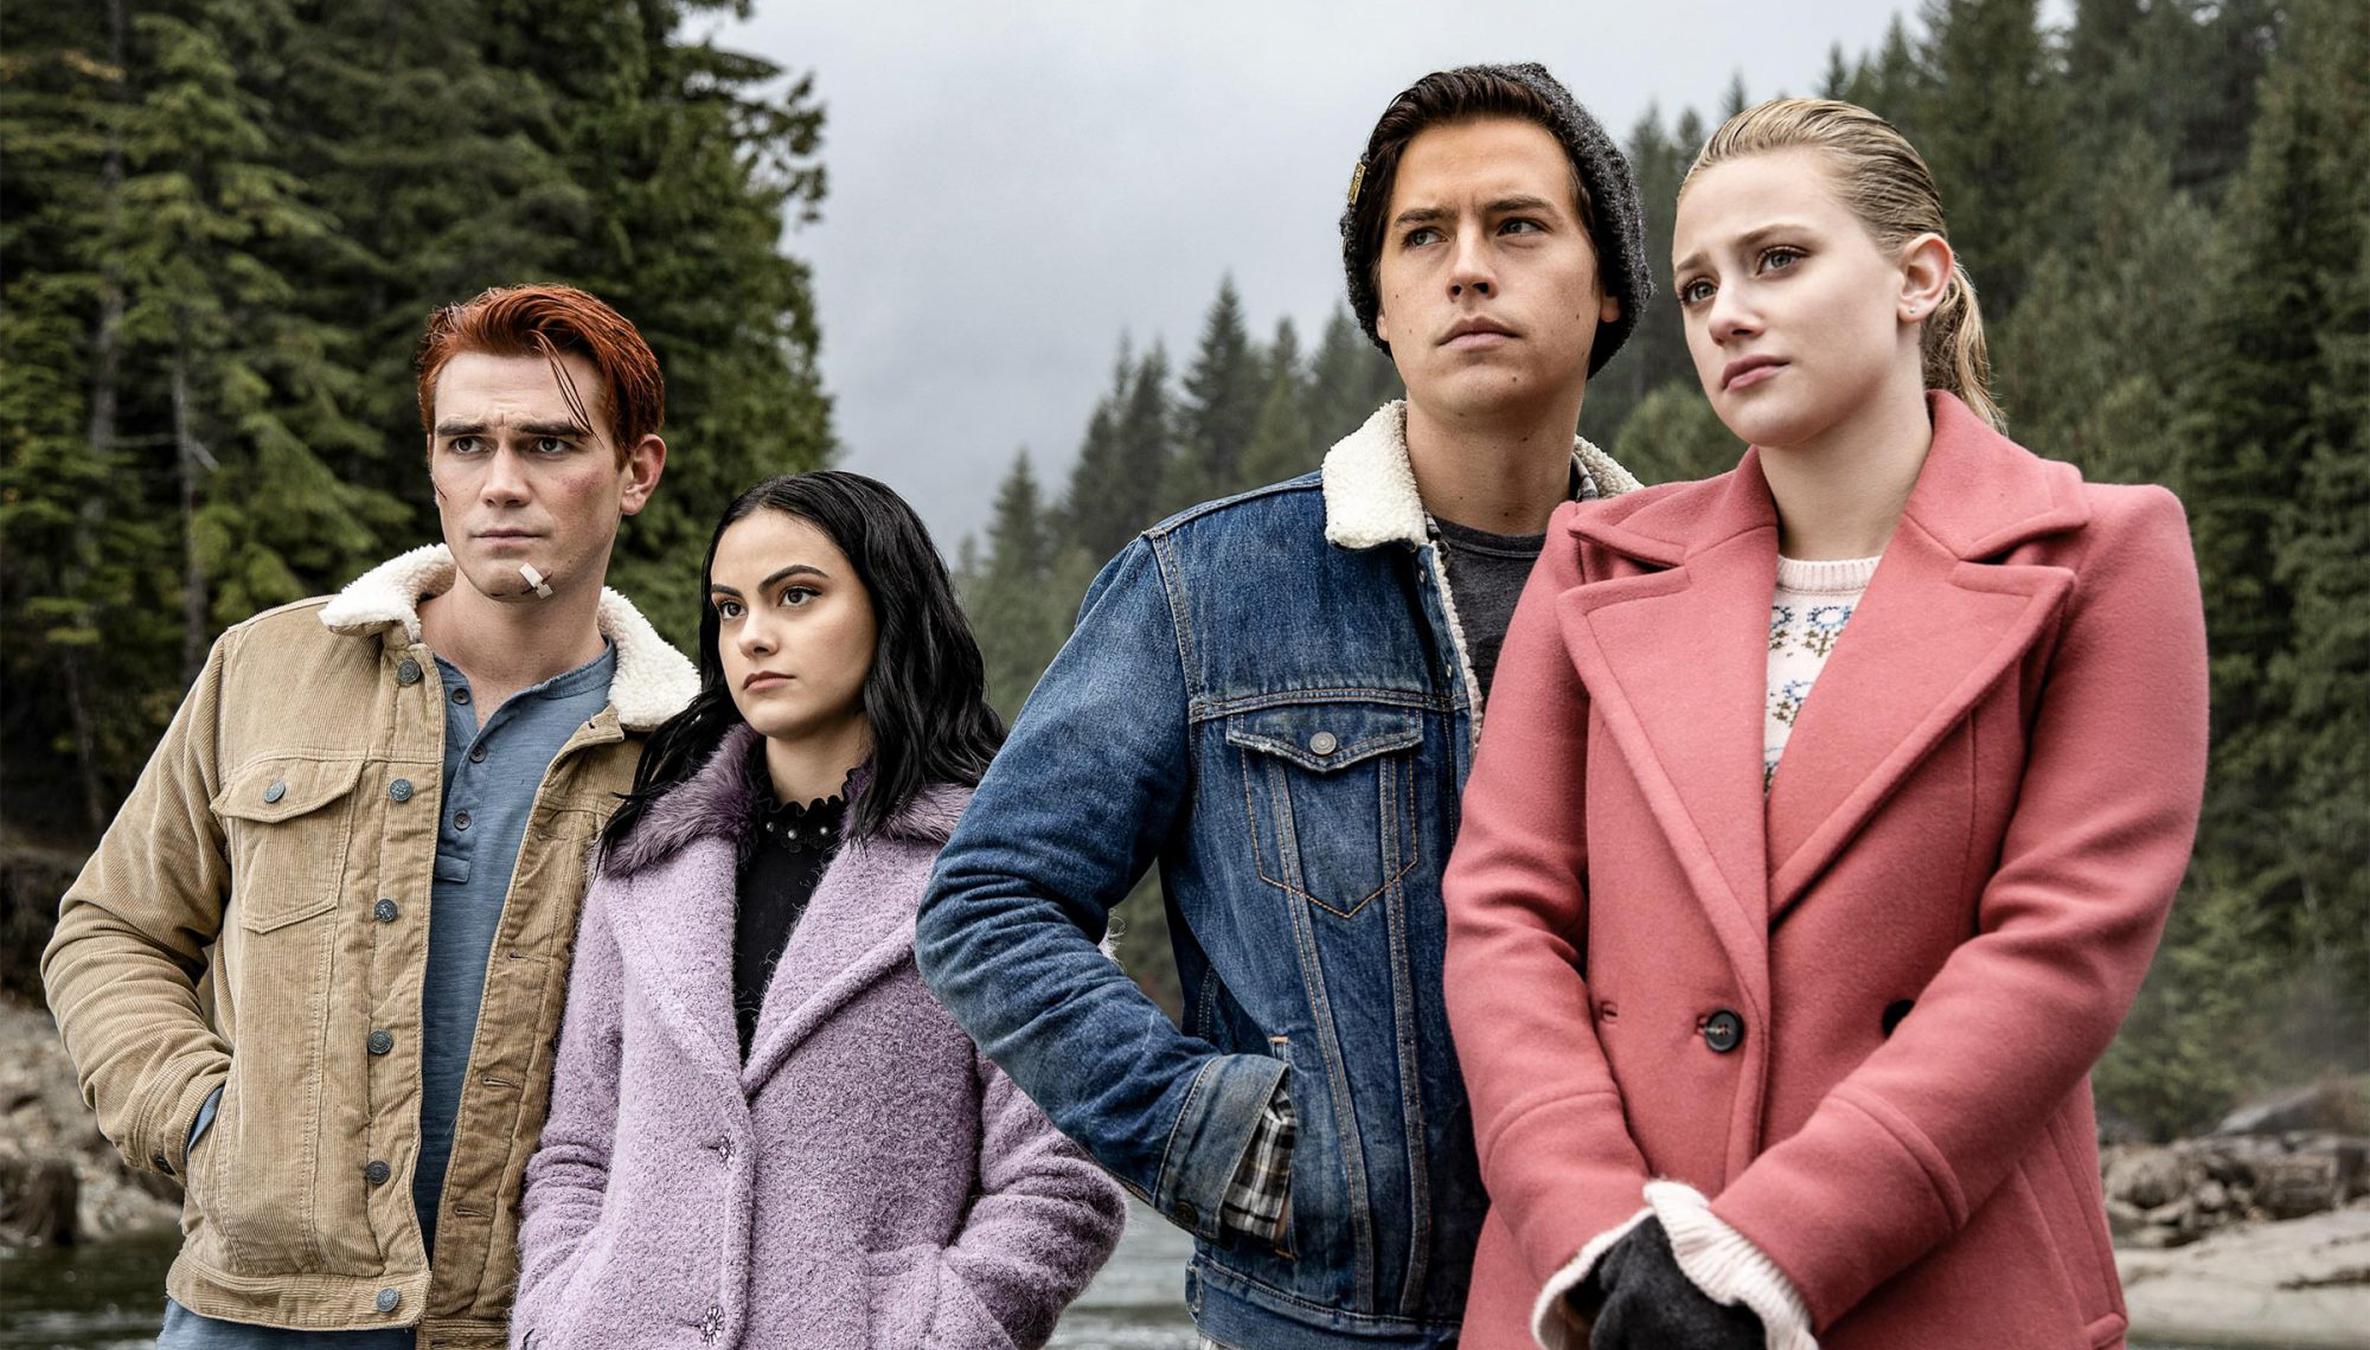 How Did ‘Riverdale’ Get Made?